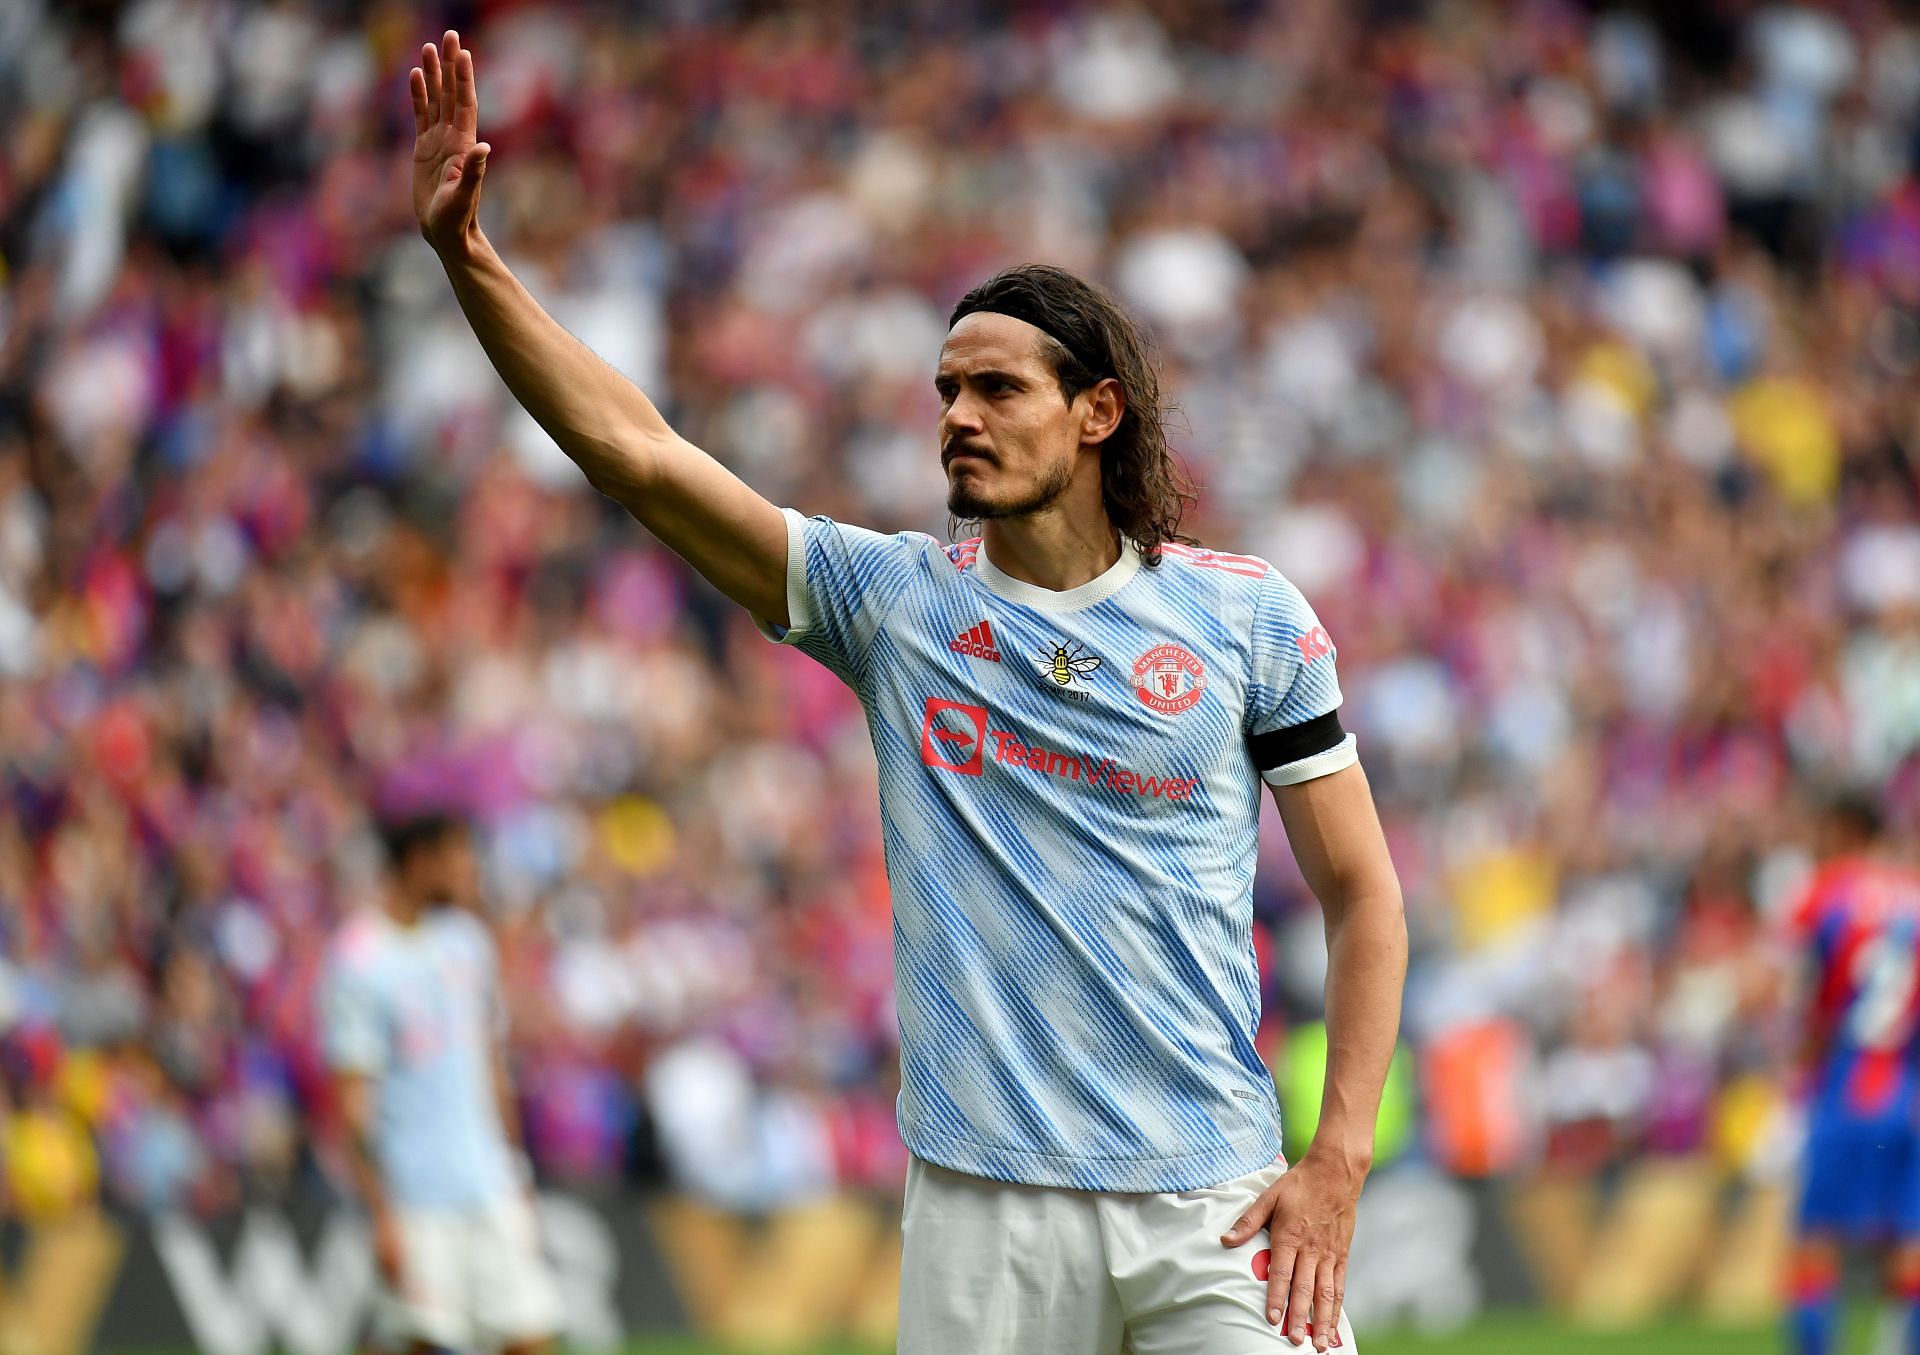 Manchester United looked to replace Cavani